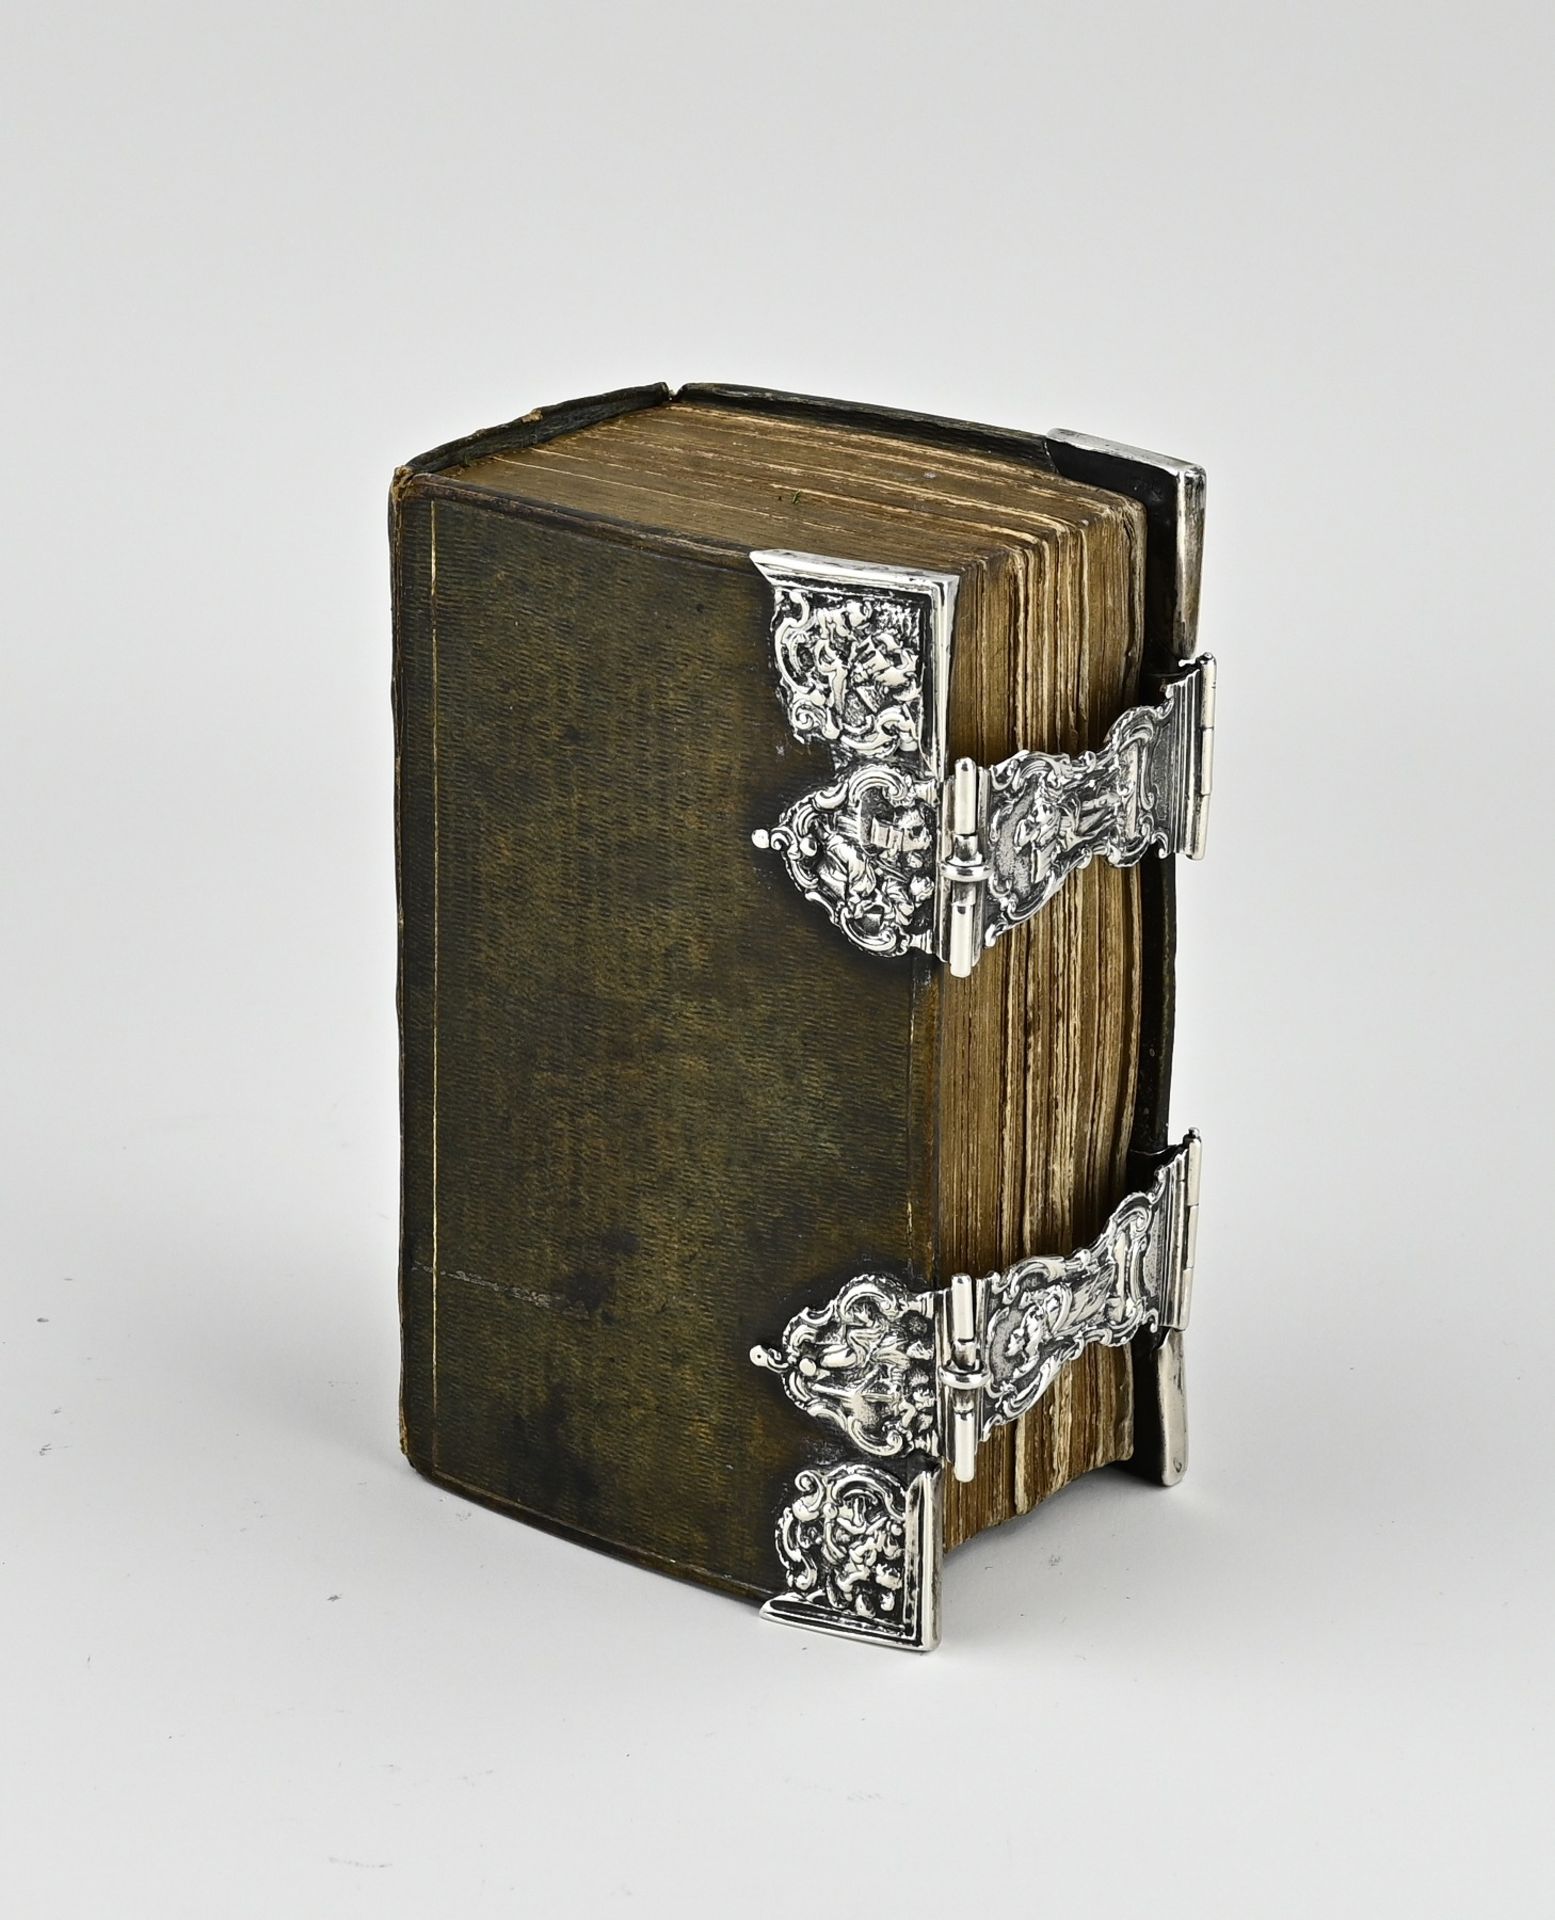 Bible with silverware, 18th century - Image 2 of 2